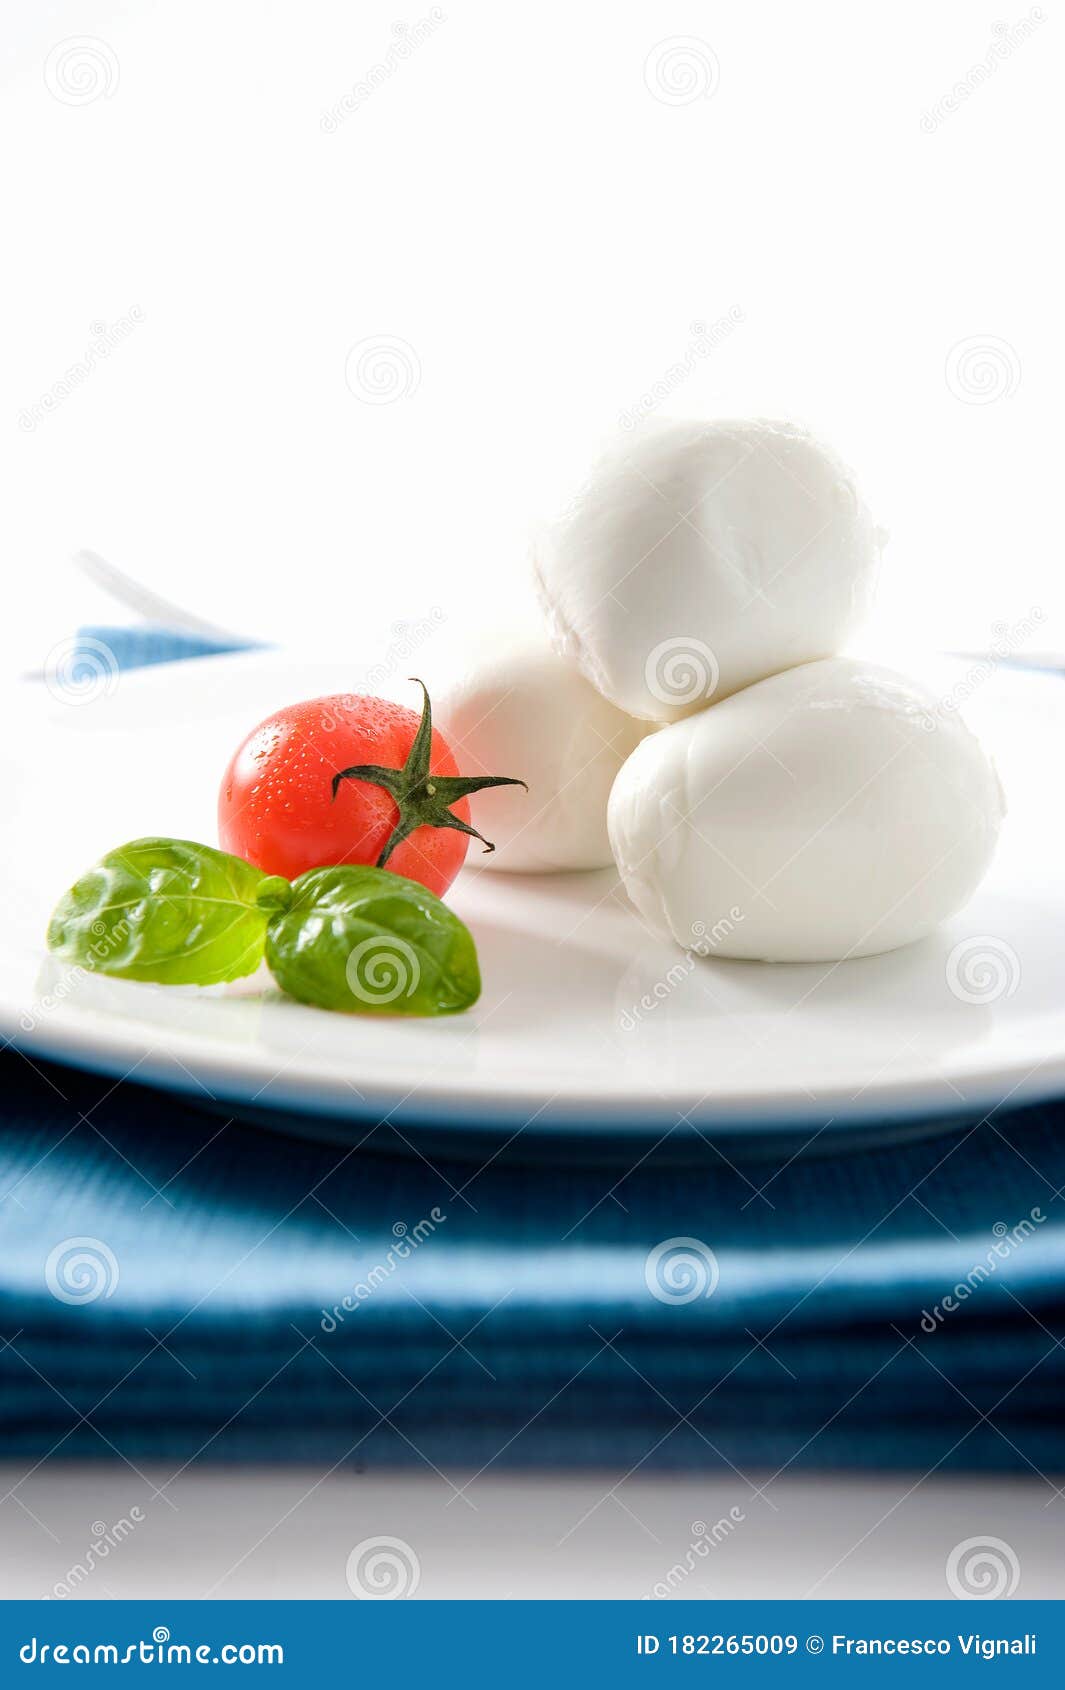 Elegant Italian Dish with a DOP Mozzarella from Campania and Tomato with Basil on a White Background and Pla Stock Image - Image of elegant, delicious: 182265009